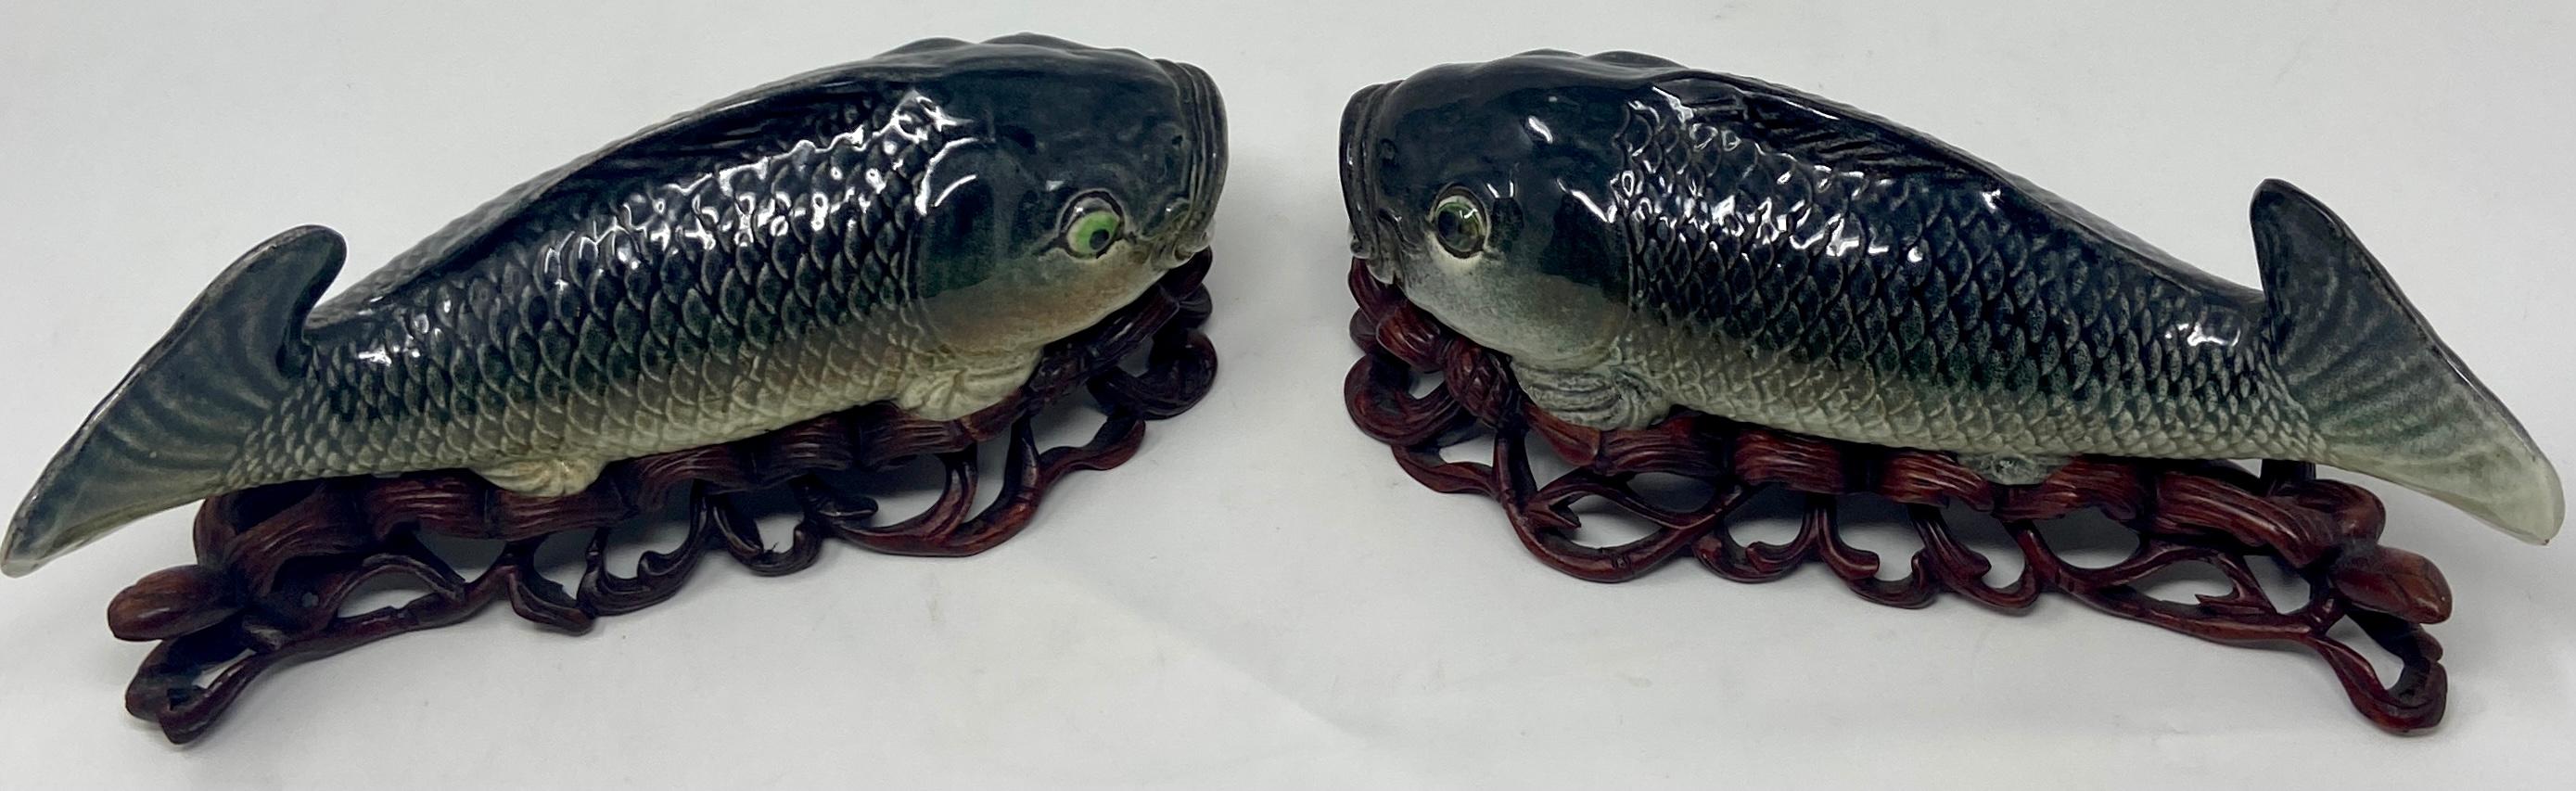 Pair antique late 19th century Chinese porcelain fish figures on carved stands.